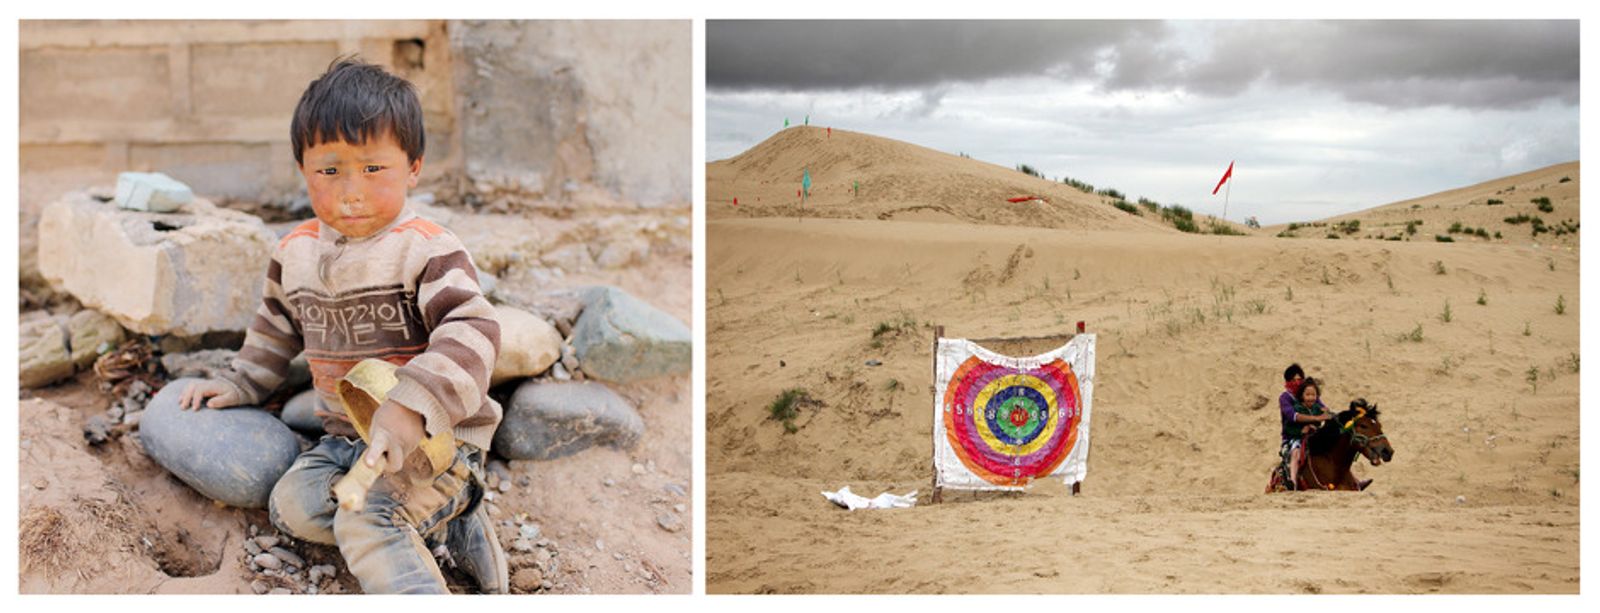 © Sean Gallagher - Image from the The Last Nomads of the Tibetan Plateau photography project